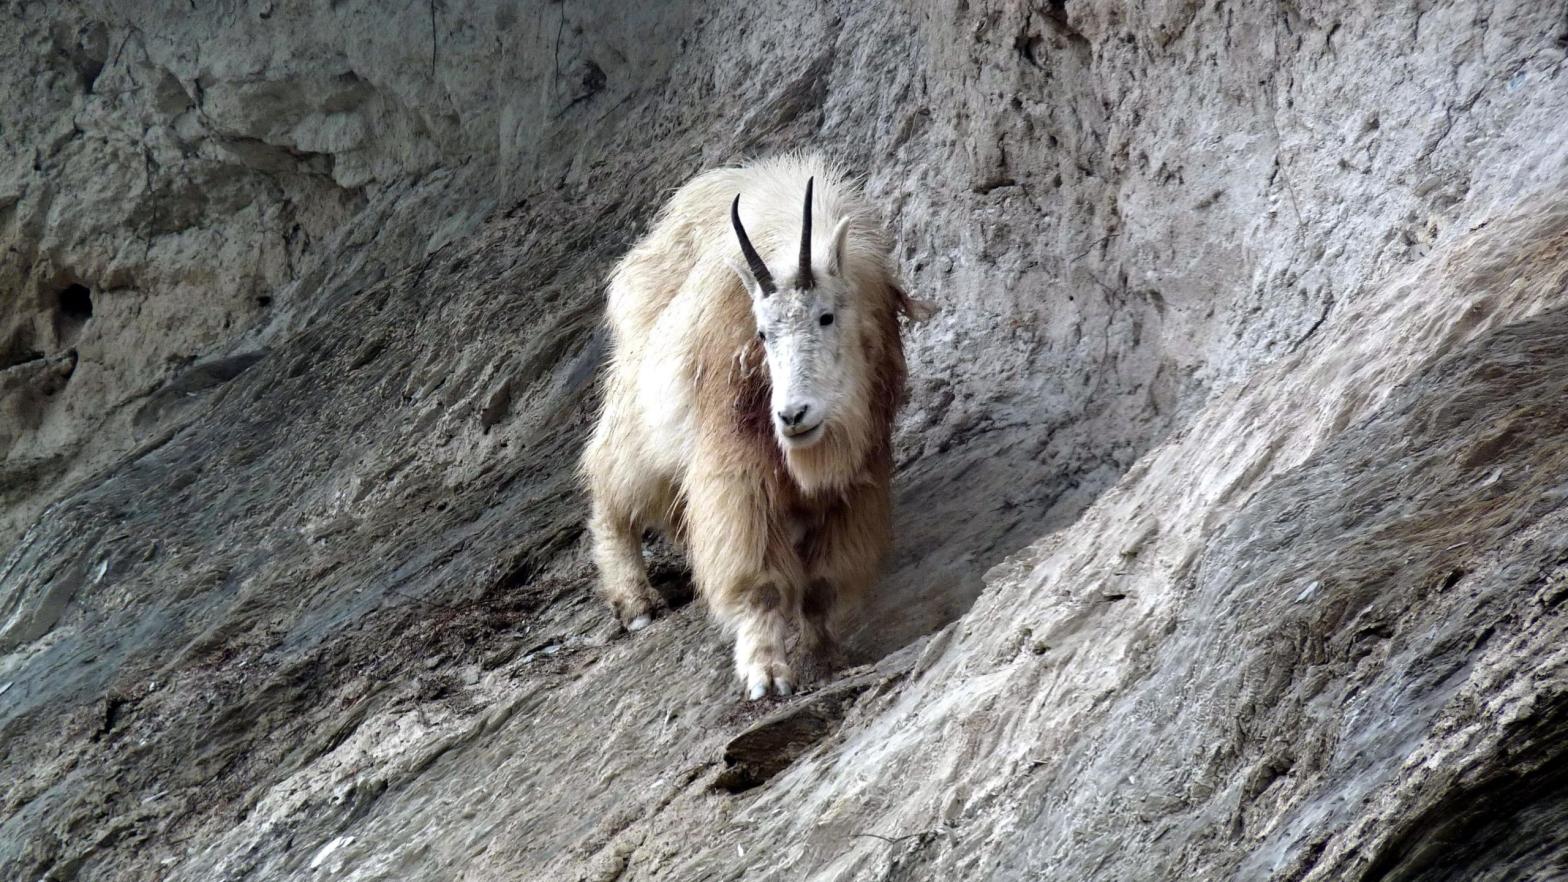 File photo of a mountain goat in Yoho National Park.  (Image: Parks Canada)